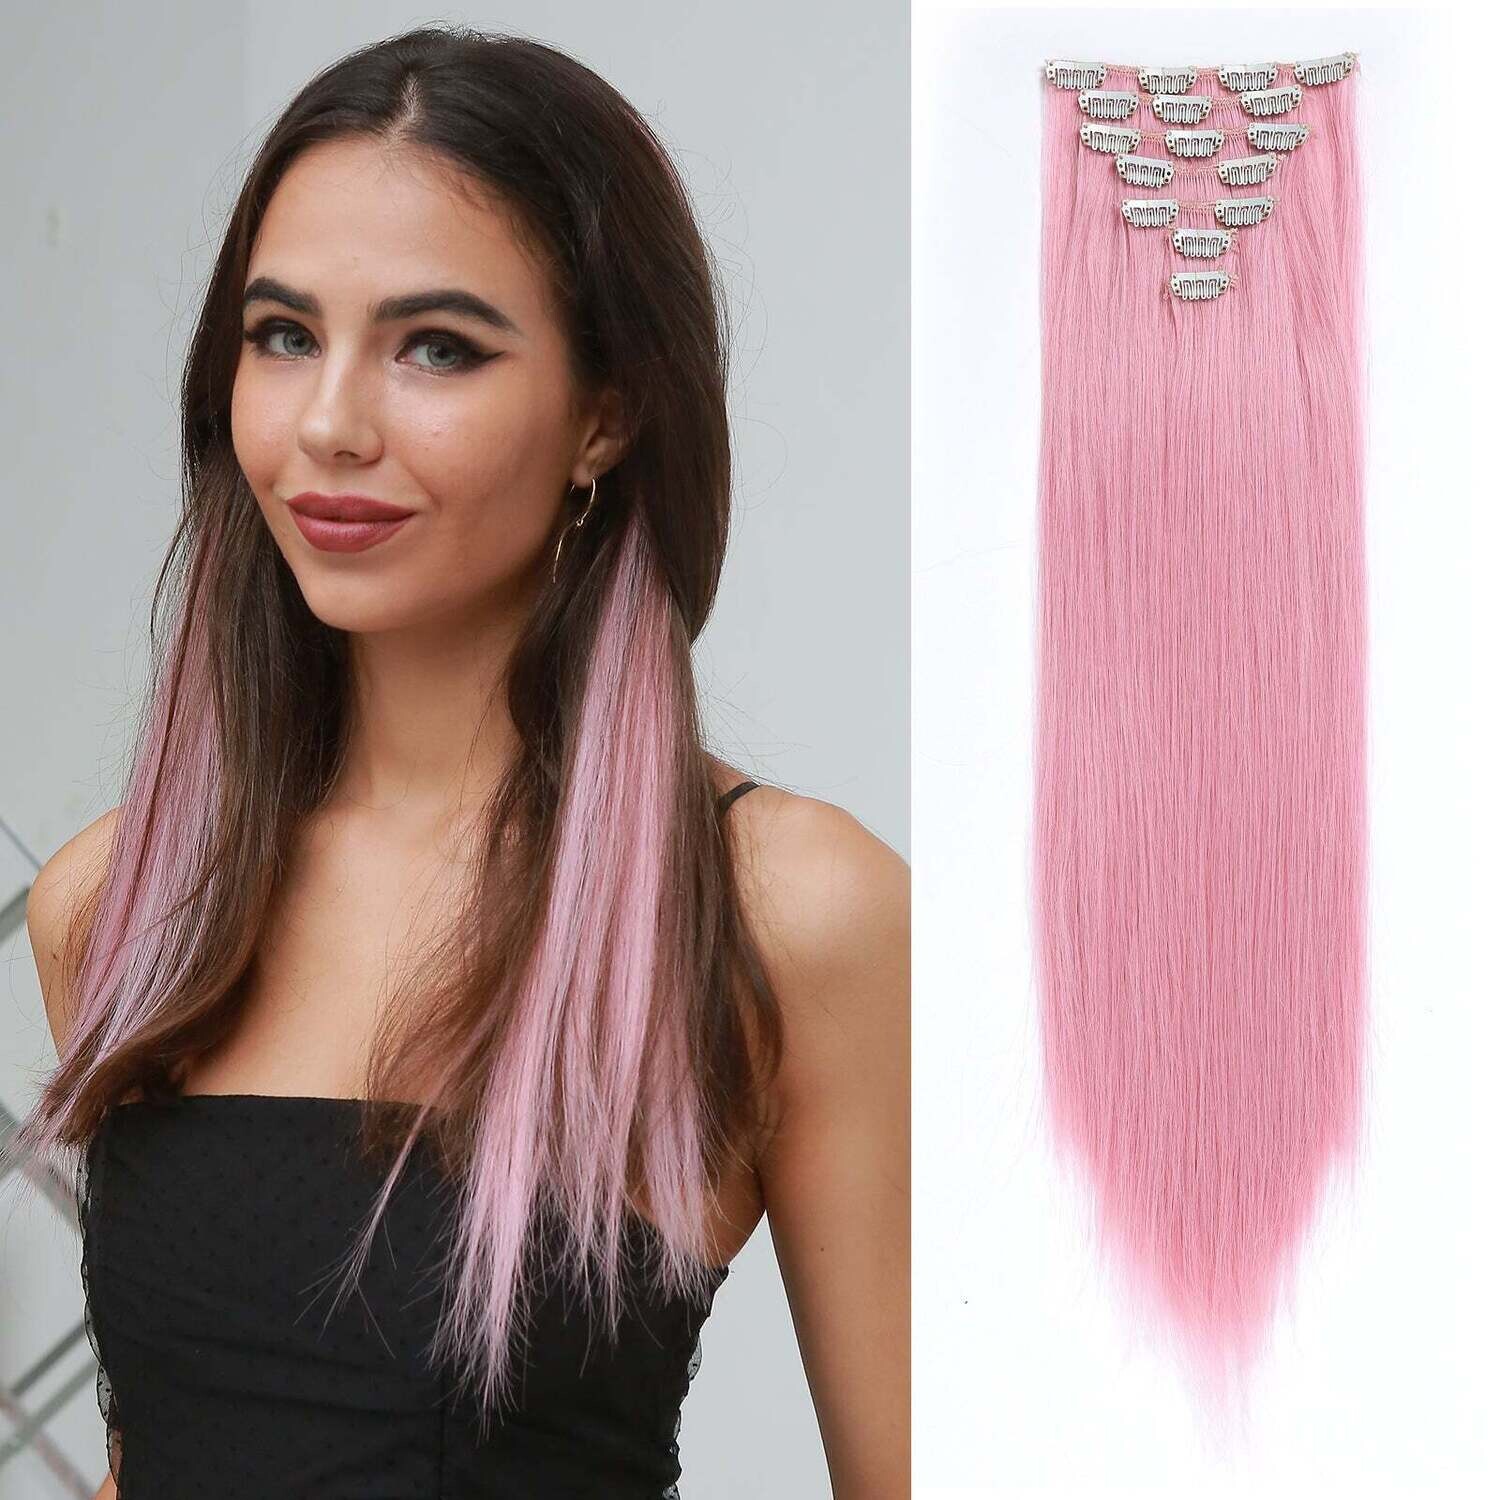 HAIRCUBE Pink Clip Long Straight Synthetic HAIR EXTENSION Pink 20 inches